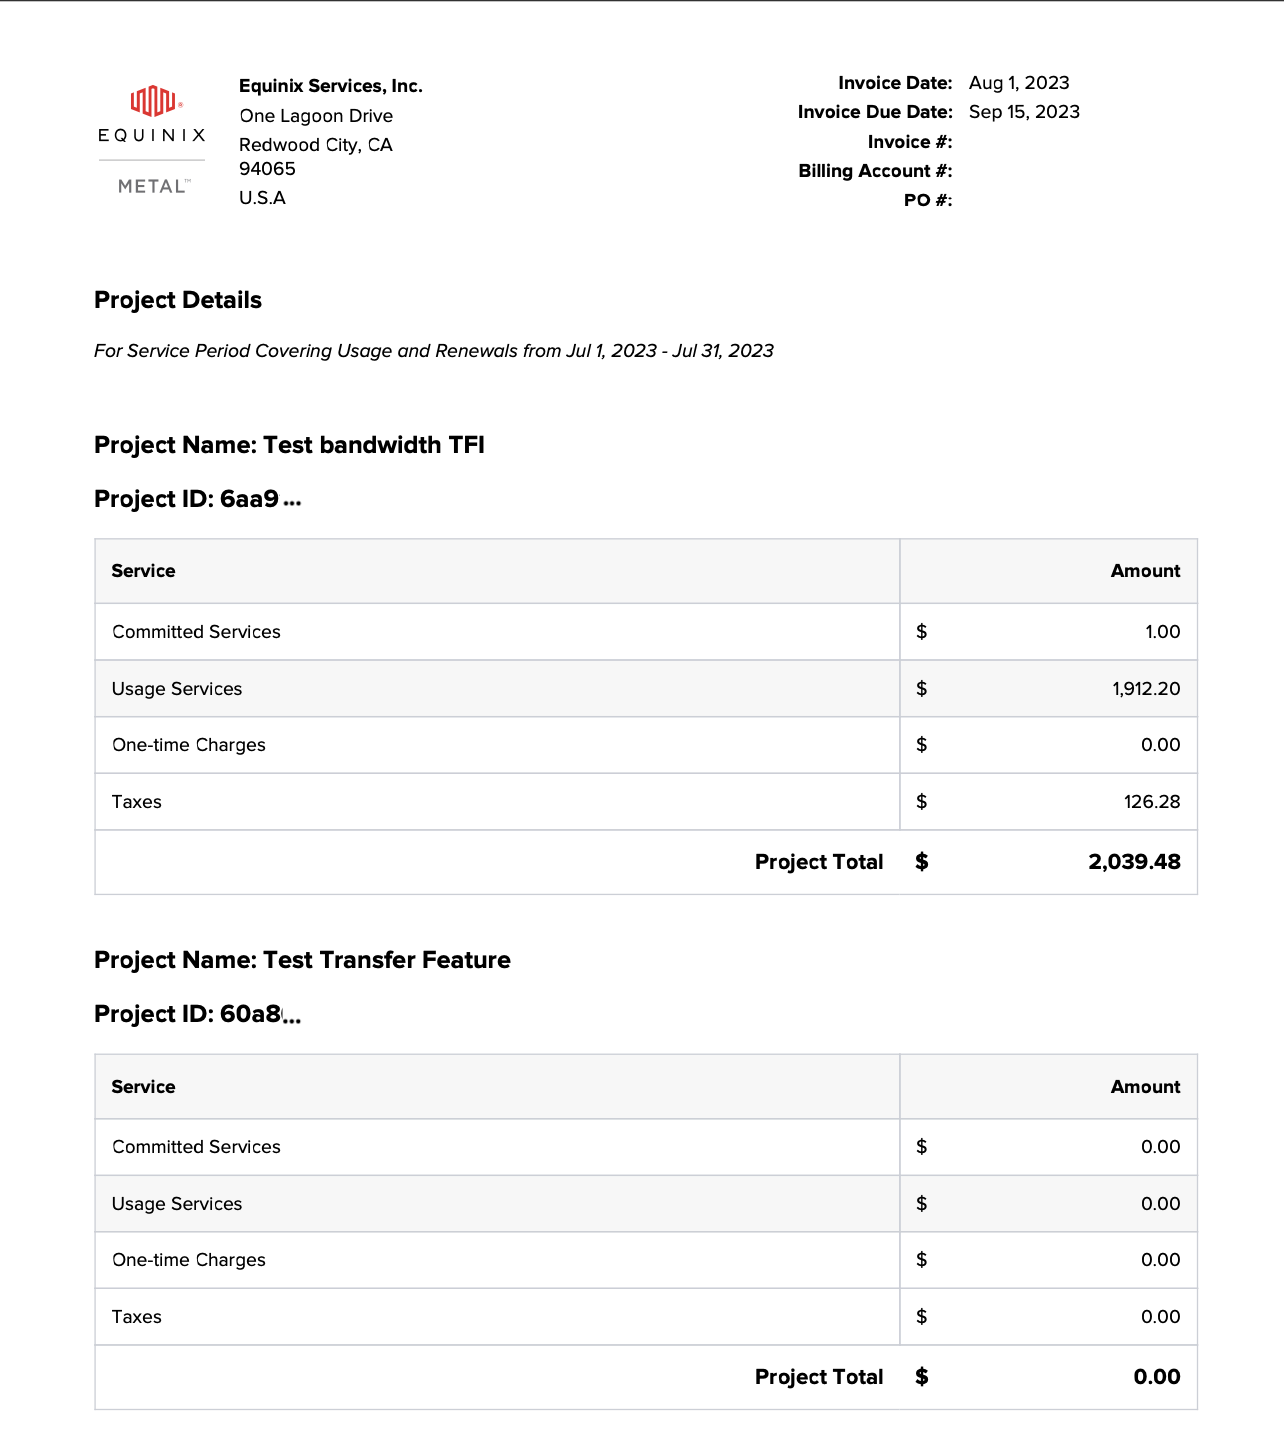 Example Invoice Page 2, Project Breakdown